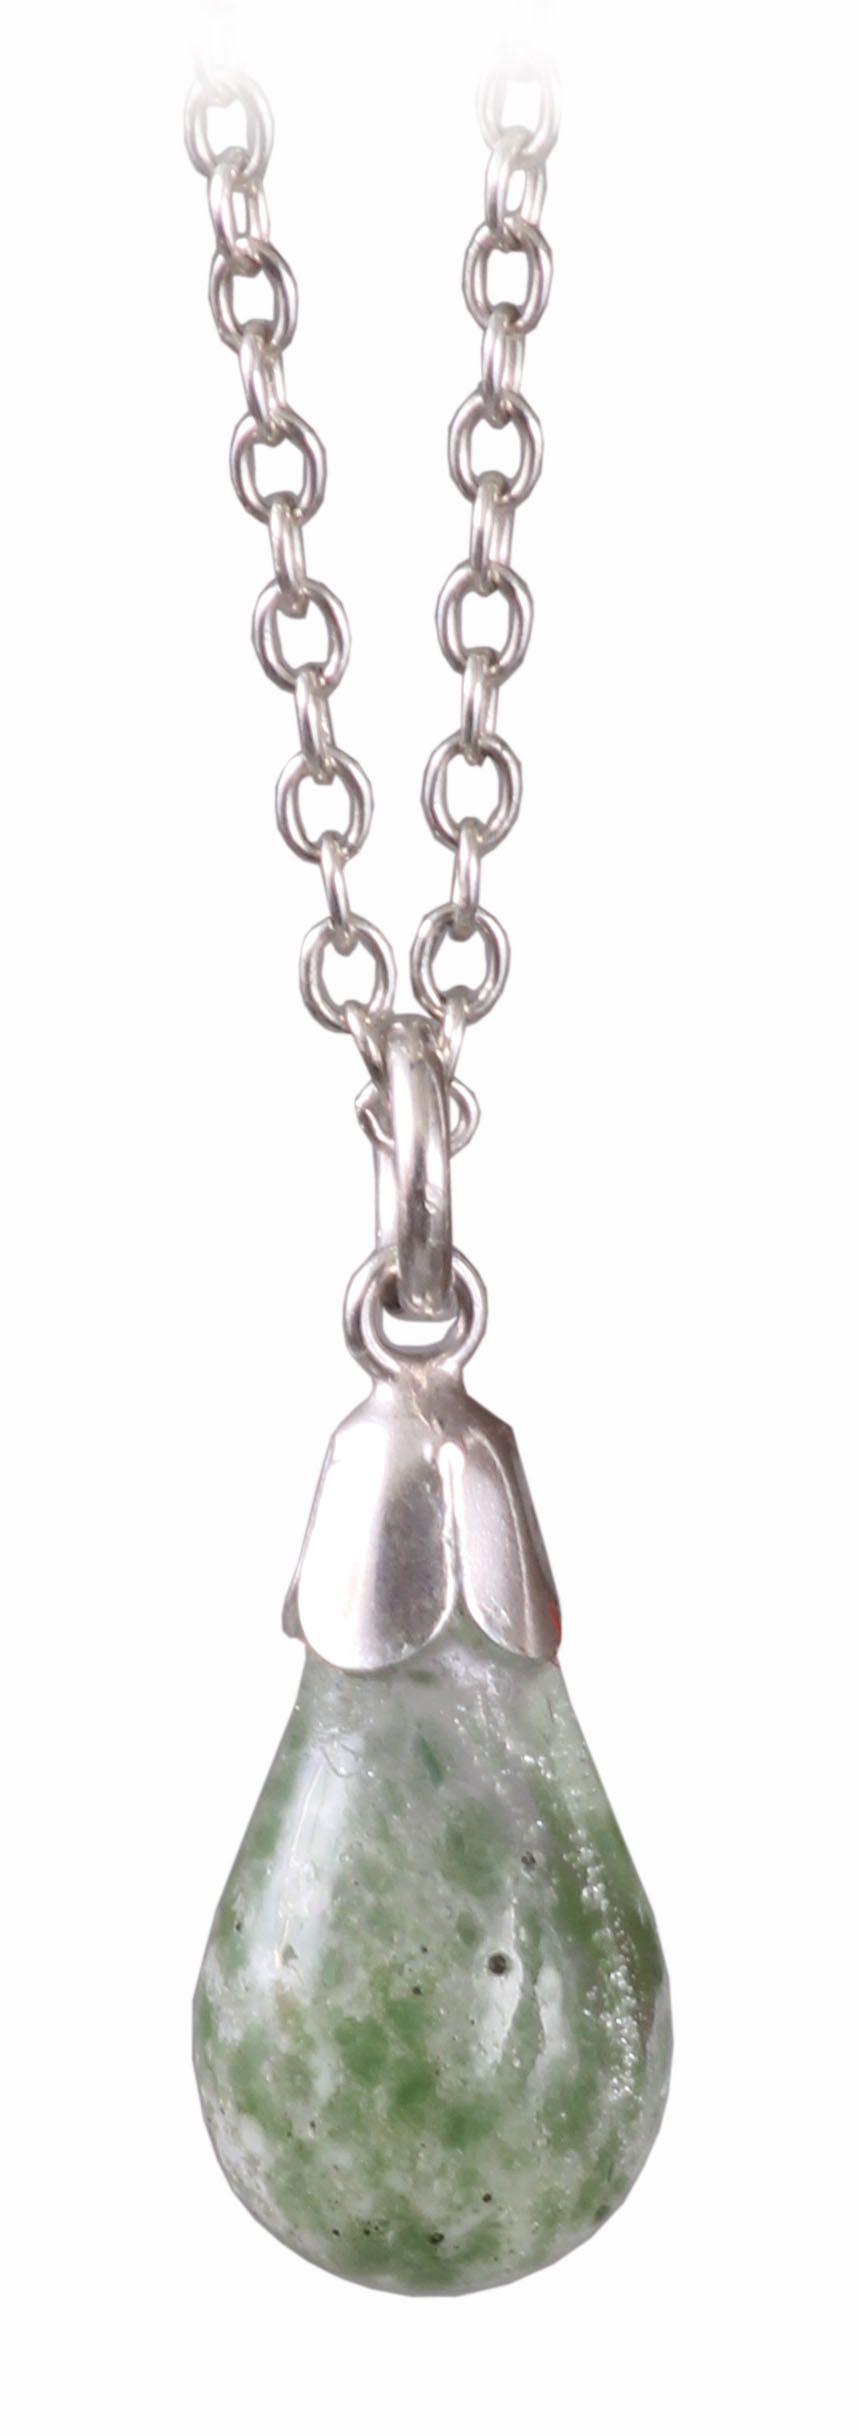 Product image for Irish Necklace - Fused Ashes and Glass Small Green Drop Pendant on Chain